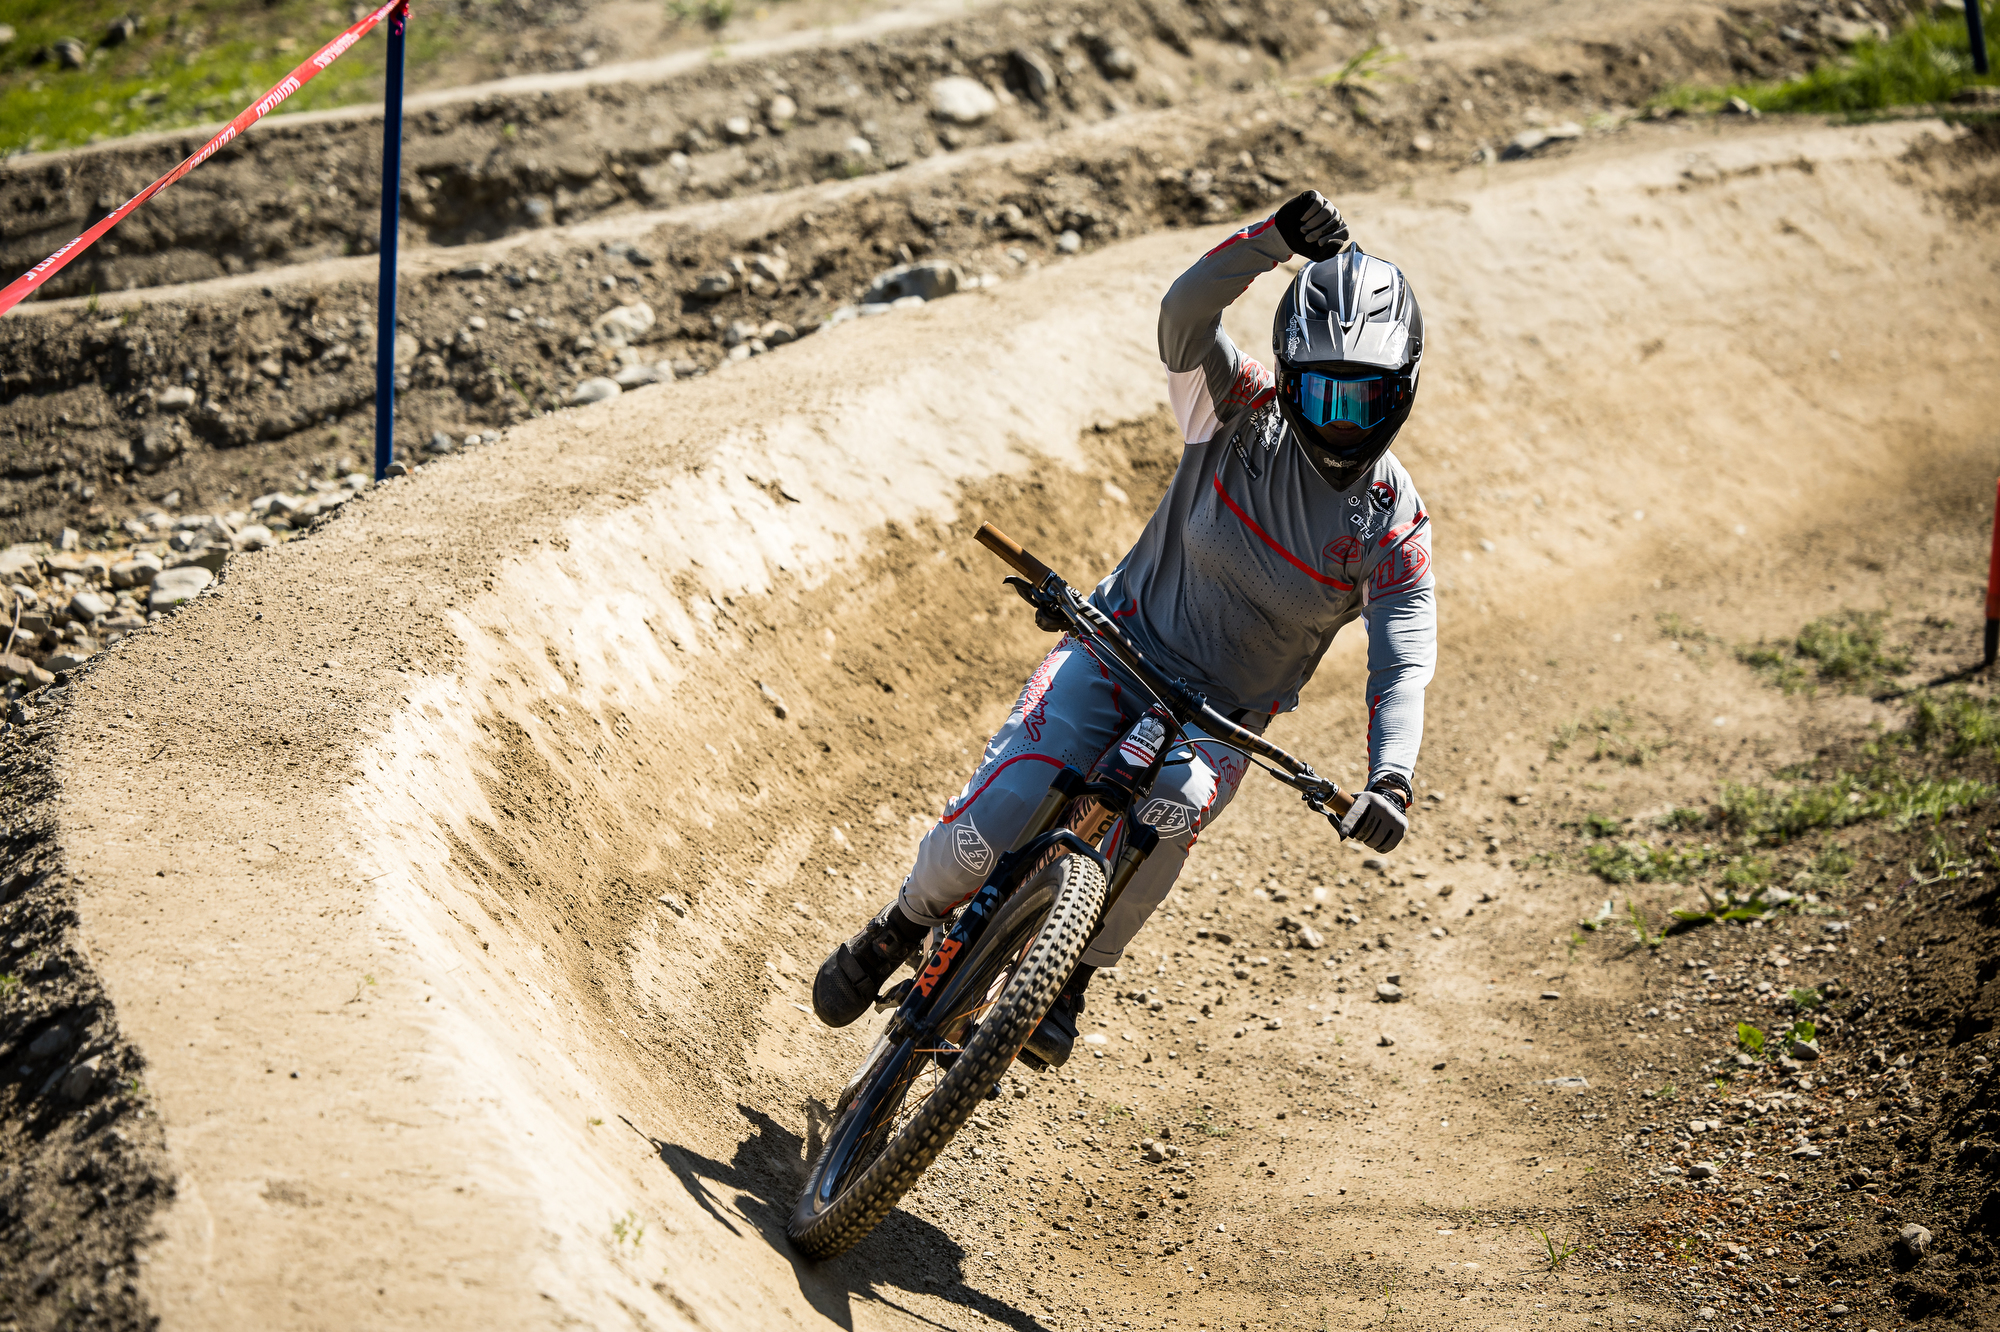 Vaea holding up her fist after winning the dual slalom